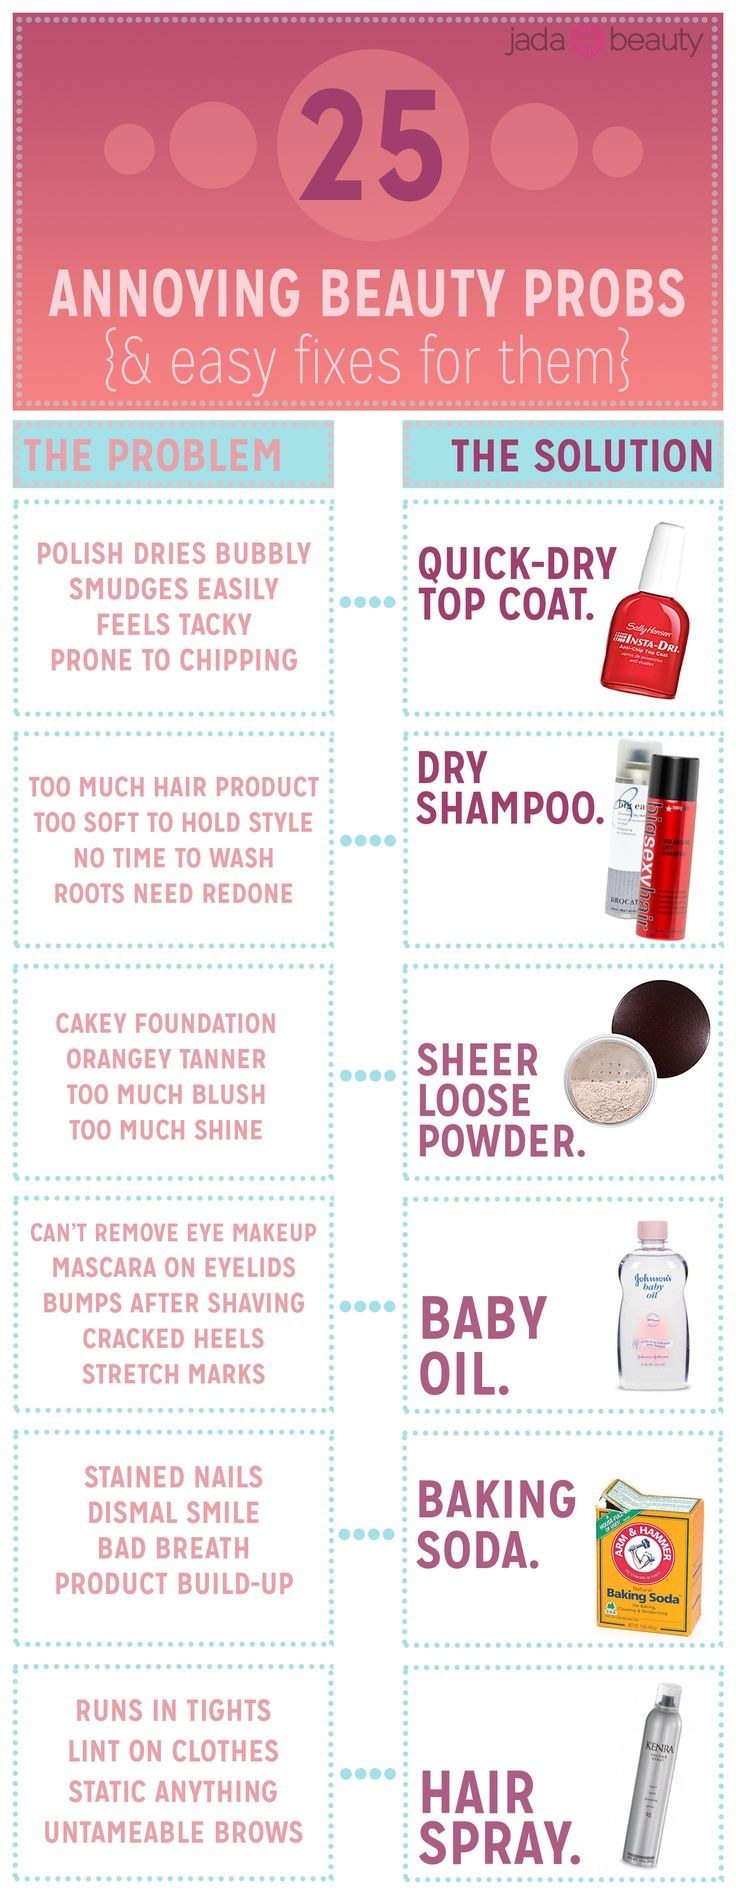 Annoying Beauty Problems & Fixes